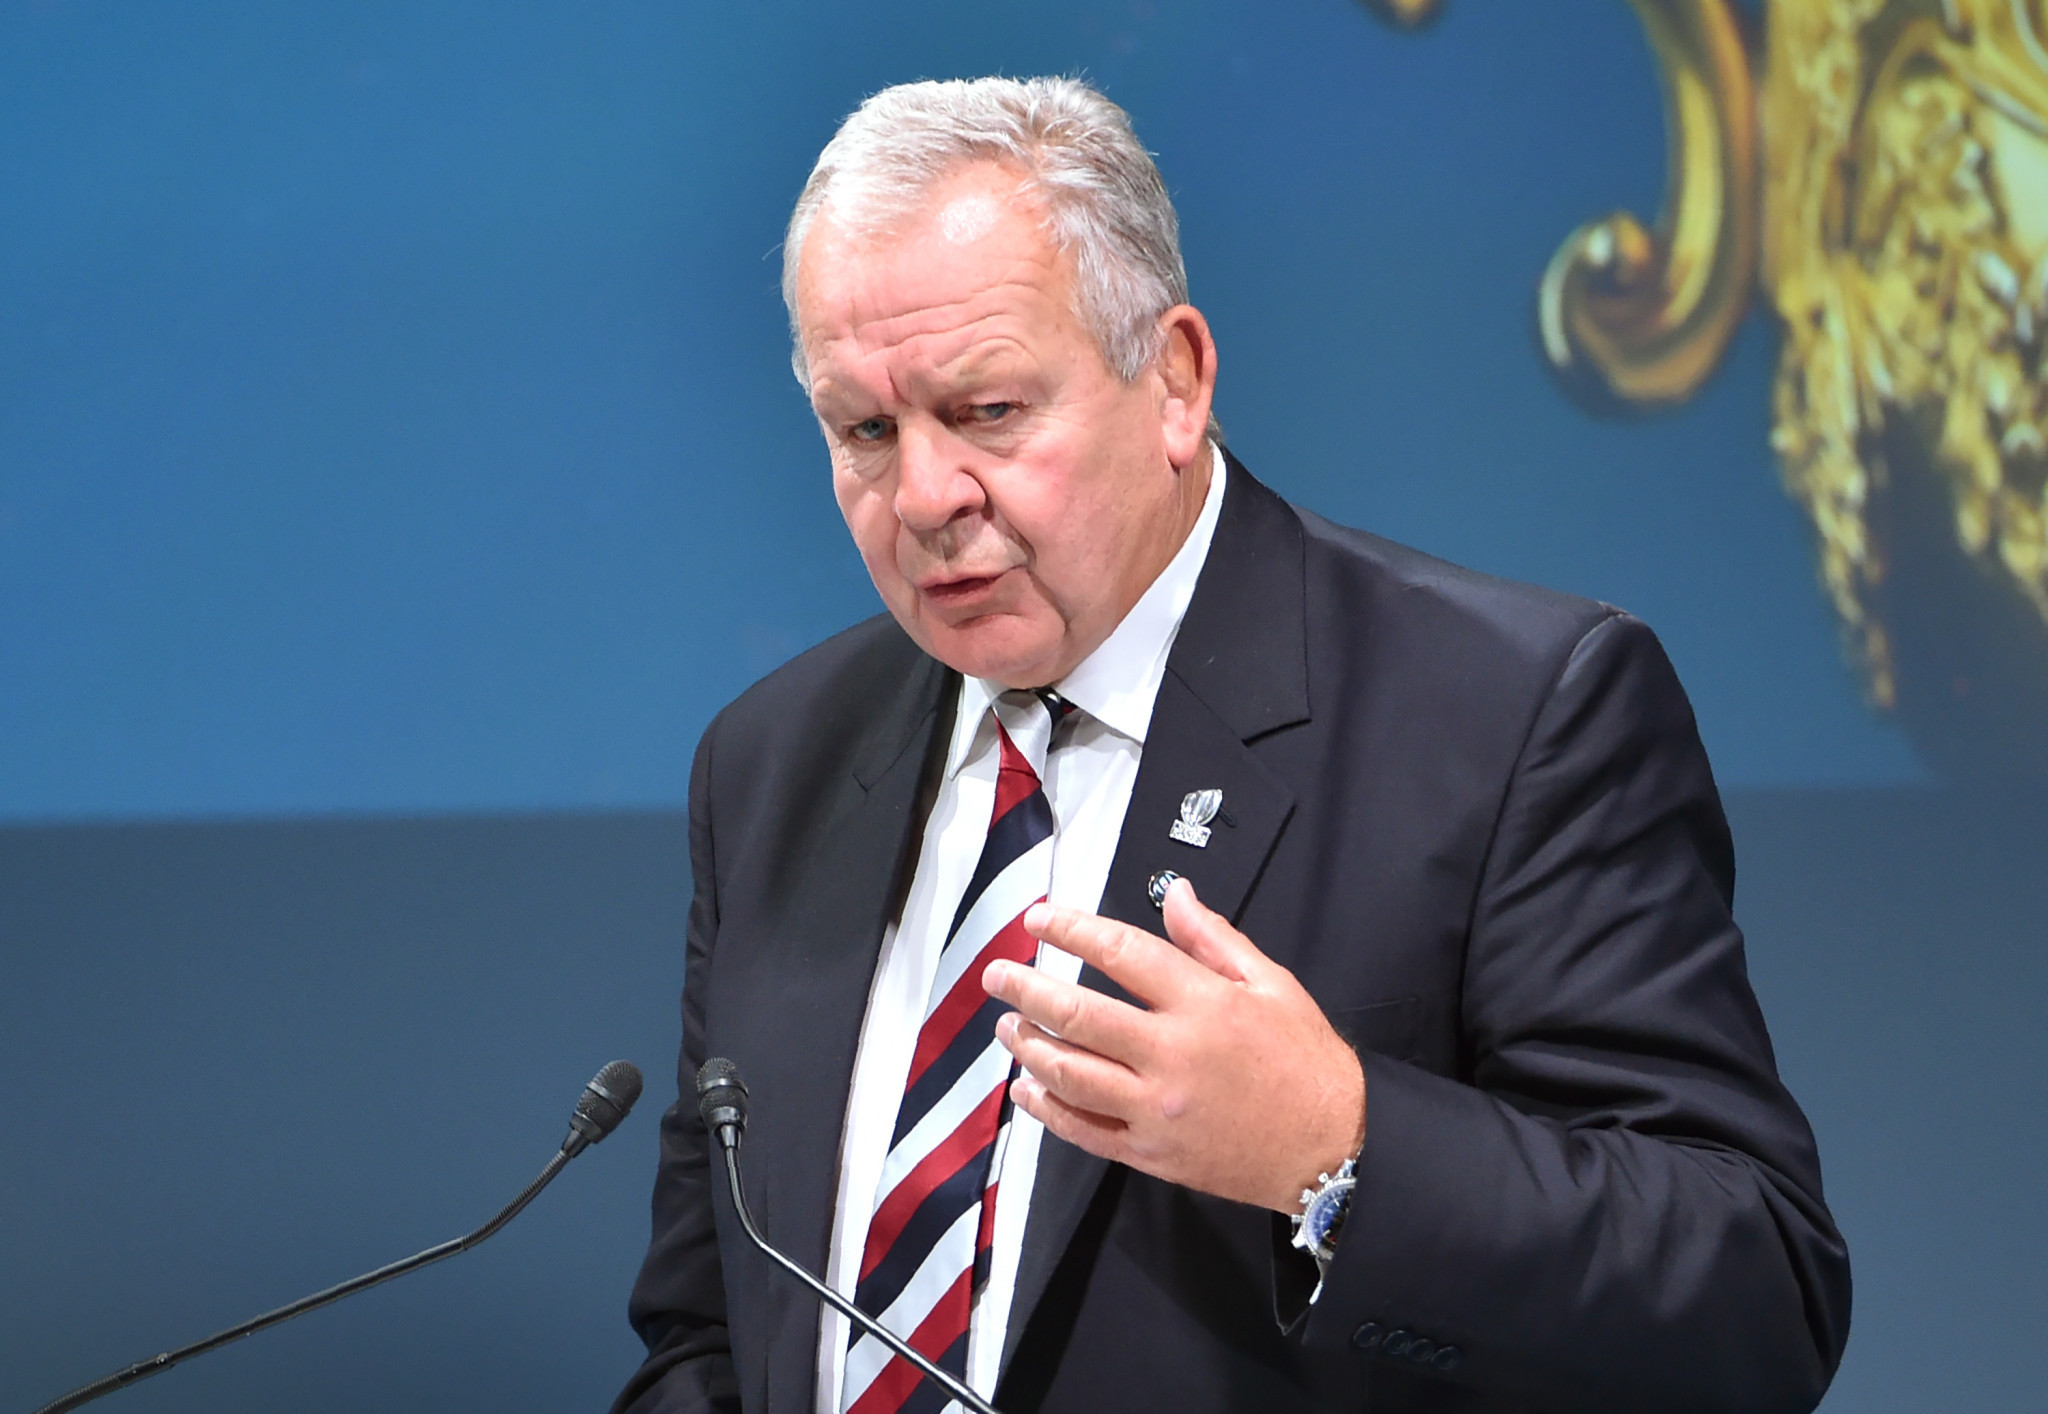 World Rugby chairman Sir Bill Beaumont said the governing body remains fully committed to exploring alternative ways to enhancing the meaning, value and opportunity of the international game after taking the decision to discontinue plans for a new Nations